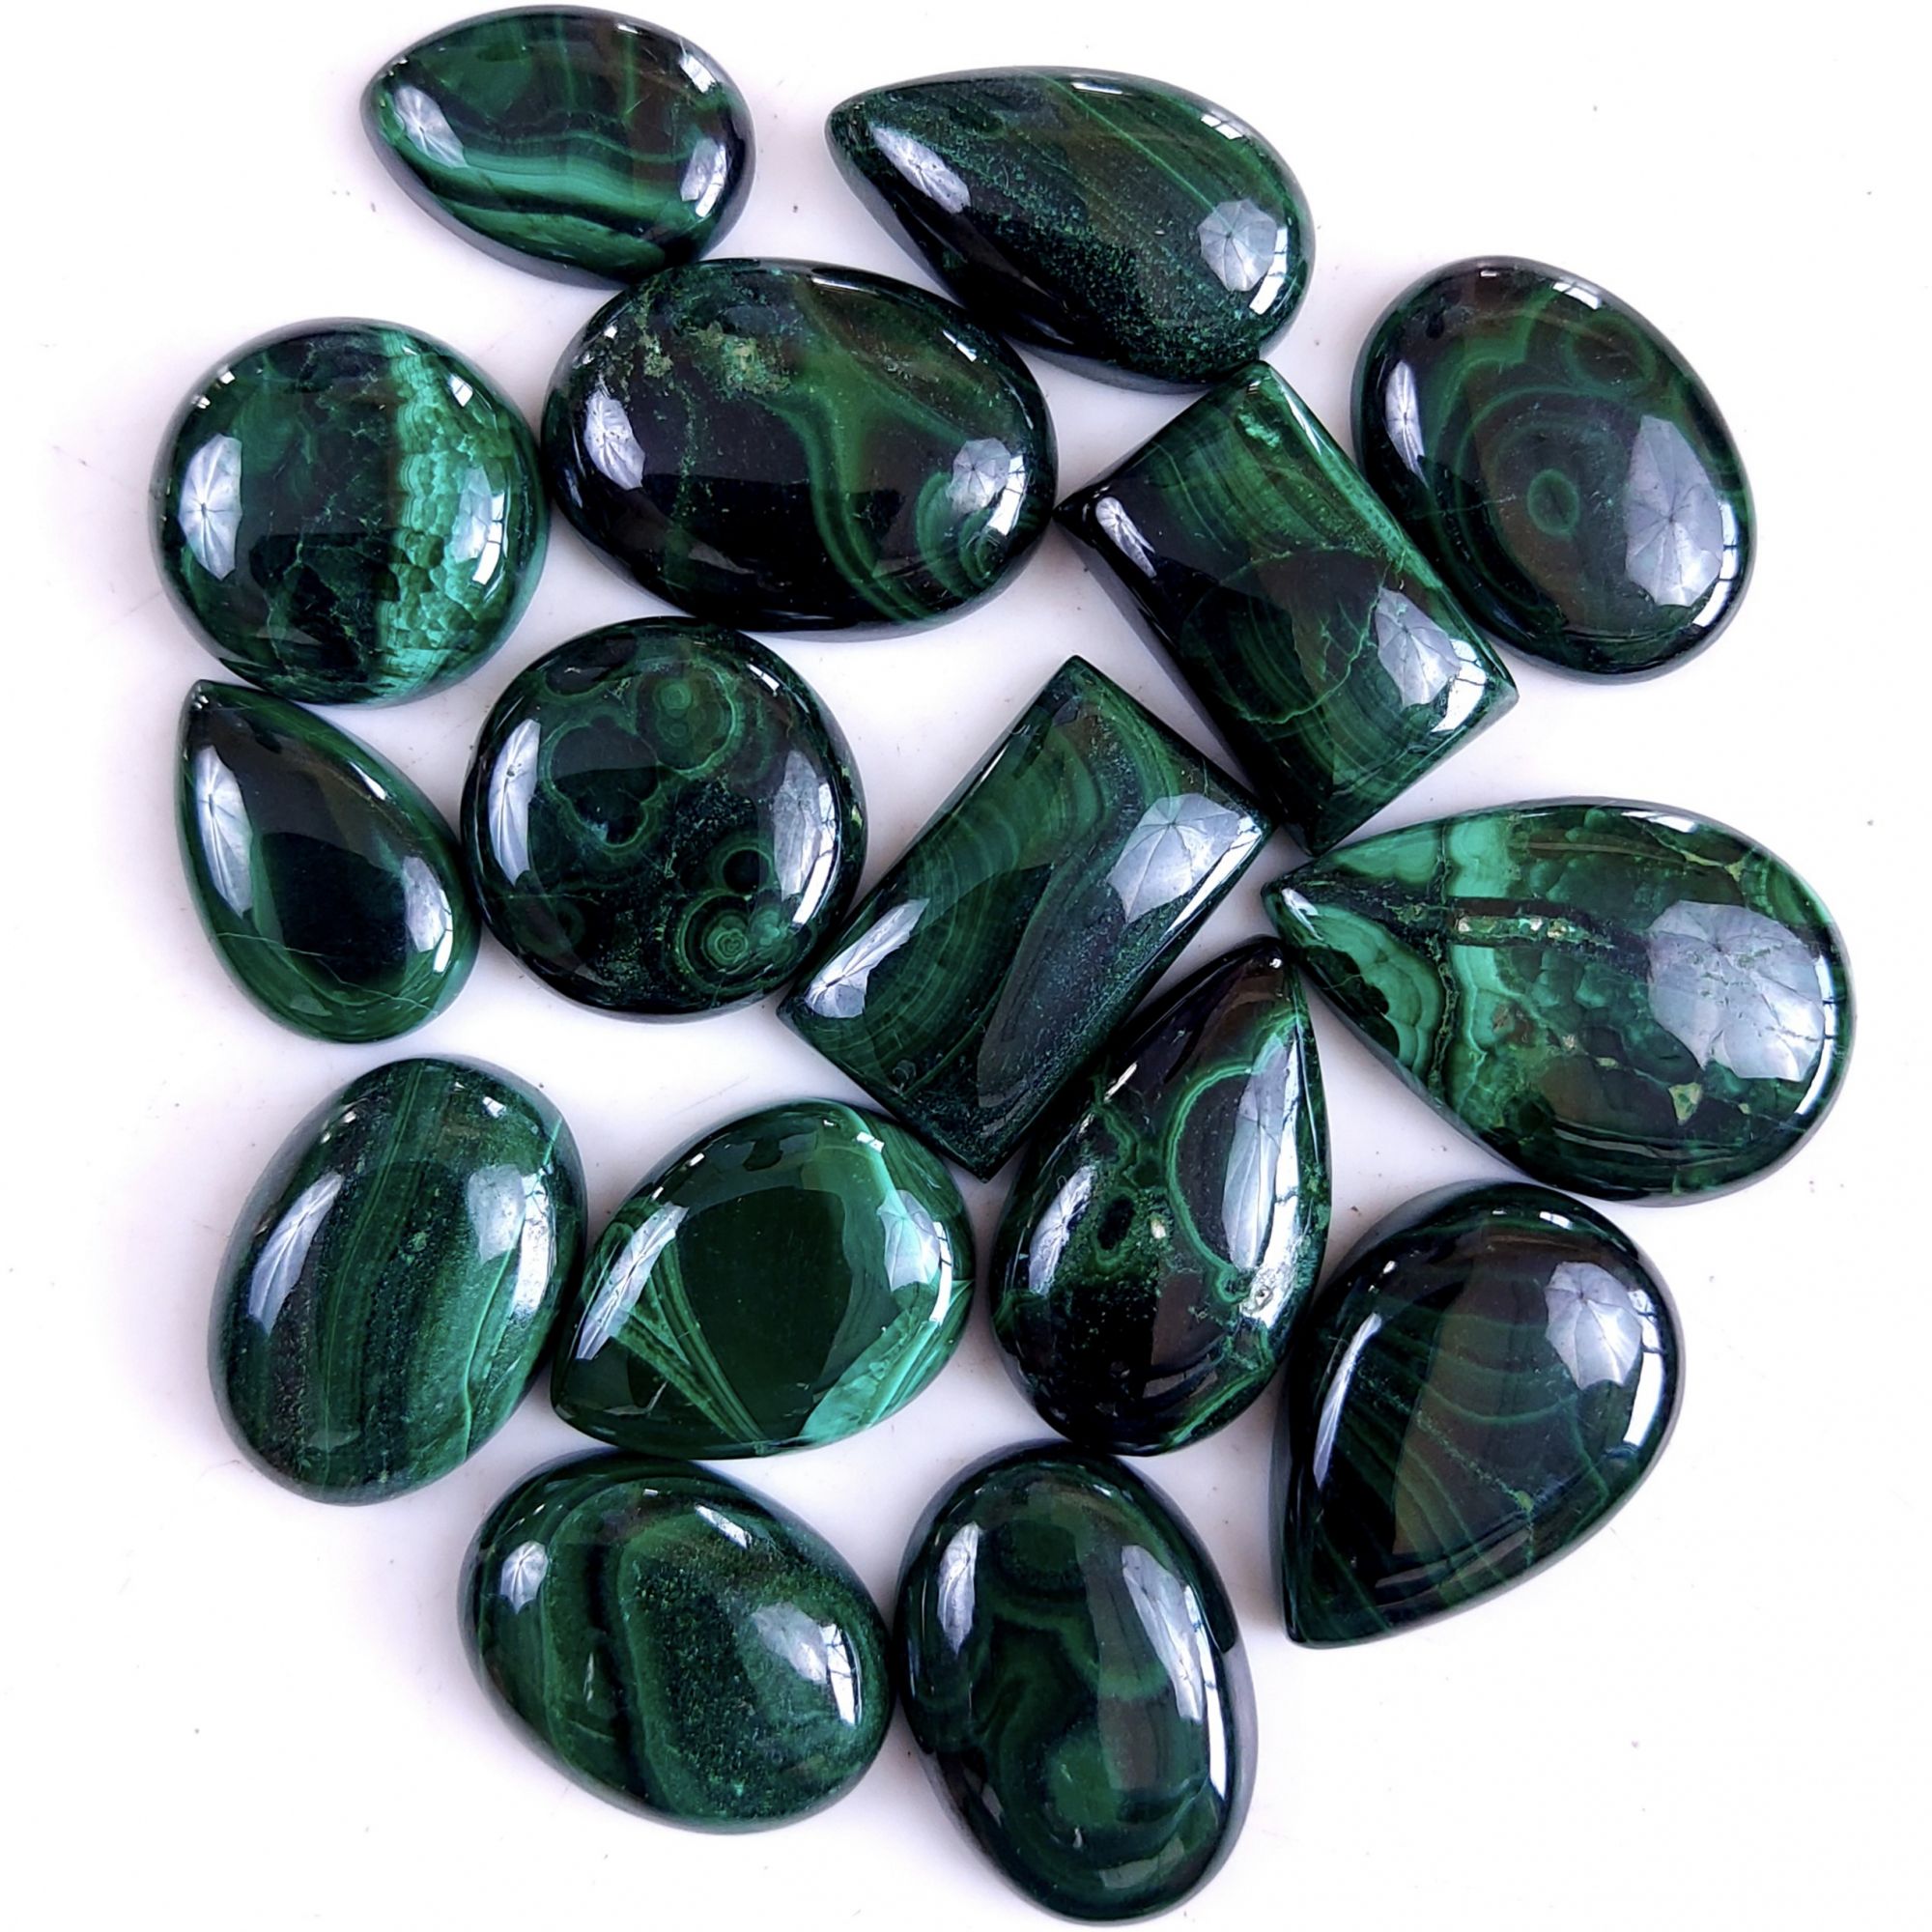 16Pcs 371Cts Natural Green Malachite Flat Back Loose Cabochon Gemstone For Handmade Jewelry Making and Craft Supplies 22x13 16x10mm#9333